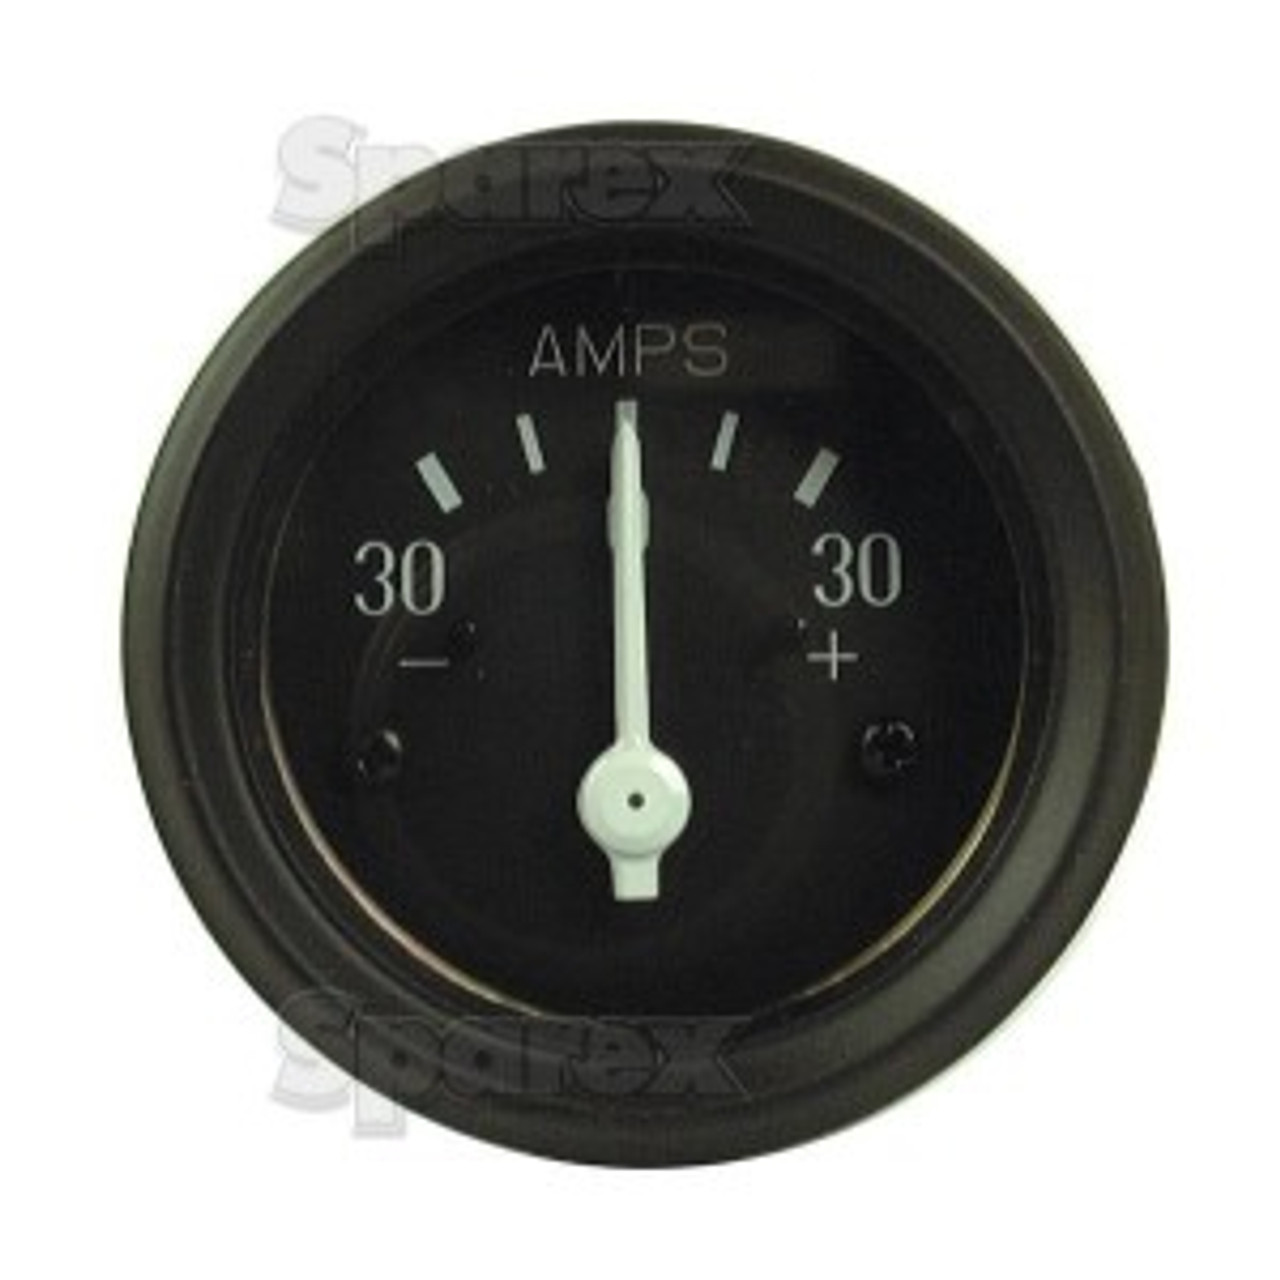 New Tractor Ammeter Gauge Assembly (Black Face)